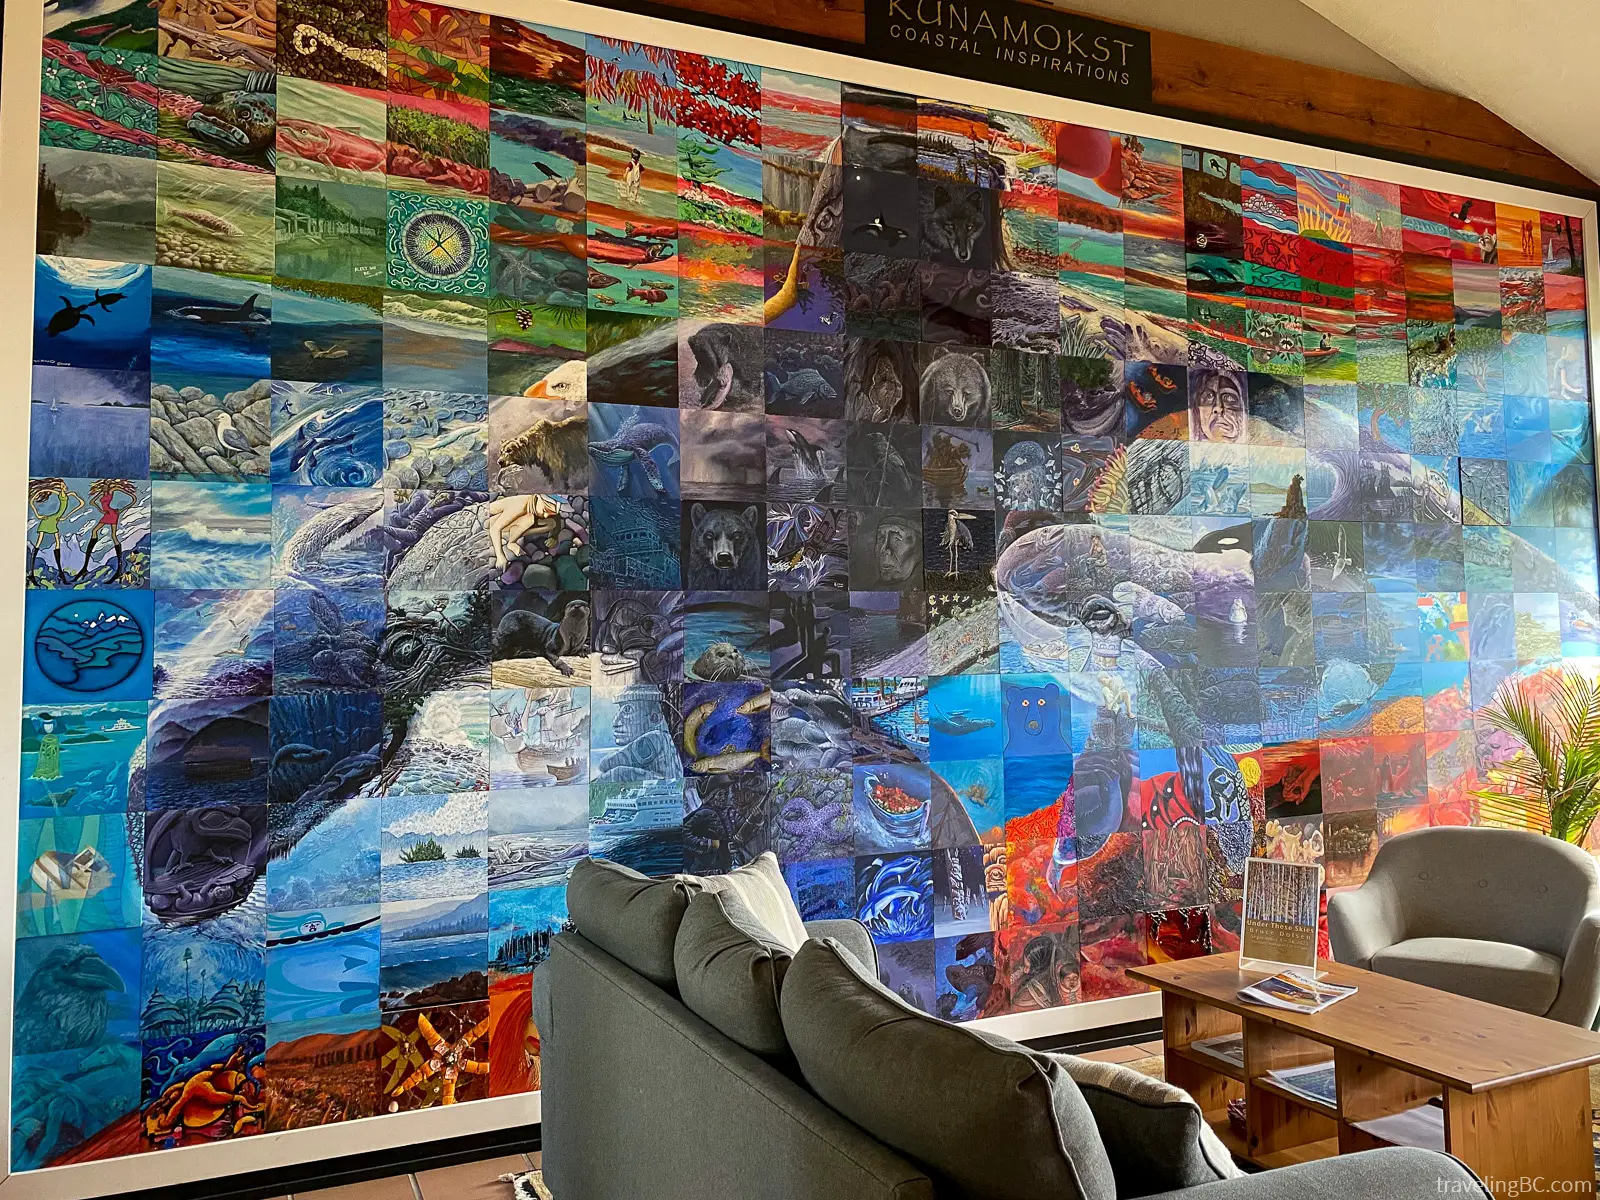 Choosing where to stay on Galiano Island? The Galiano Ocean Inn is one of the best accommodations on Galiano Island. The Kunamokst Mural greets you at the entrance to their spa.